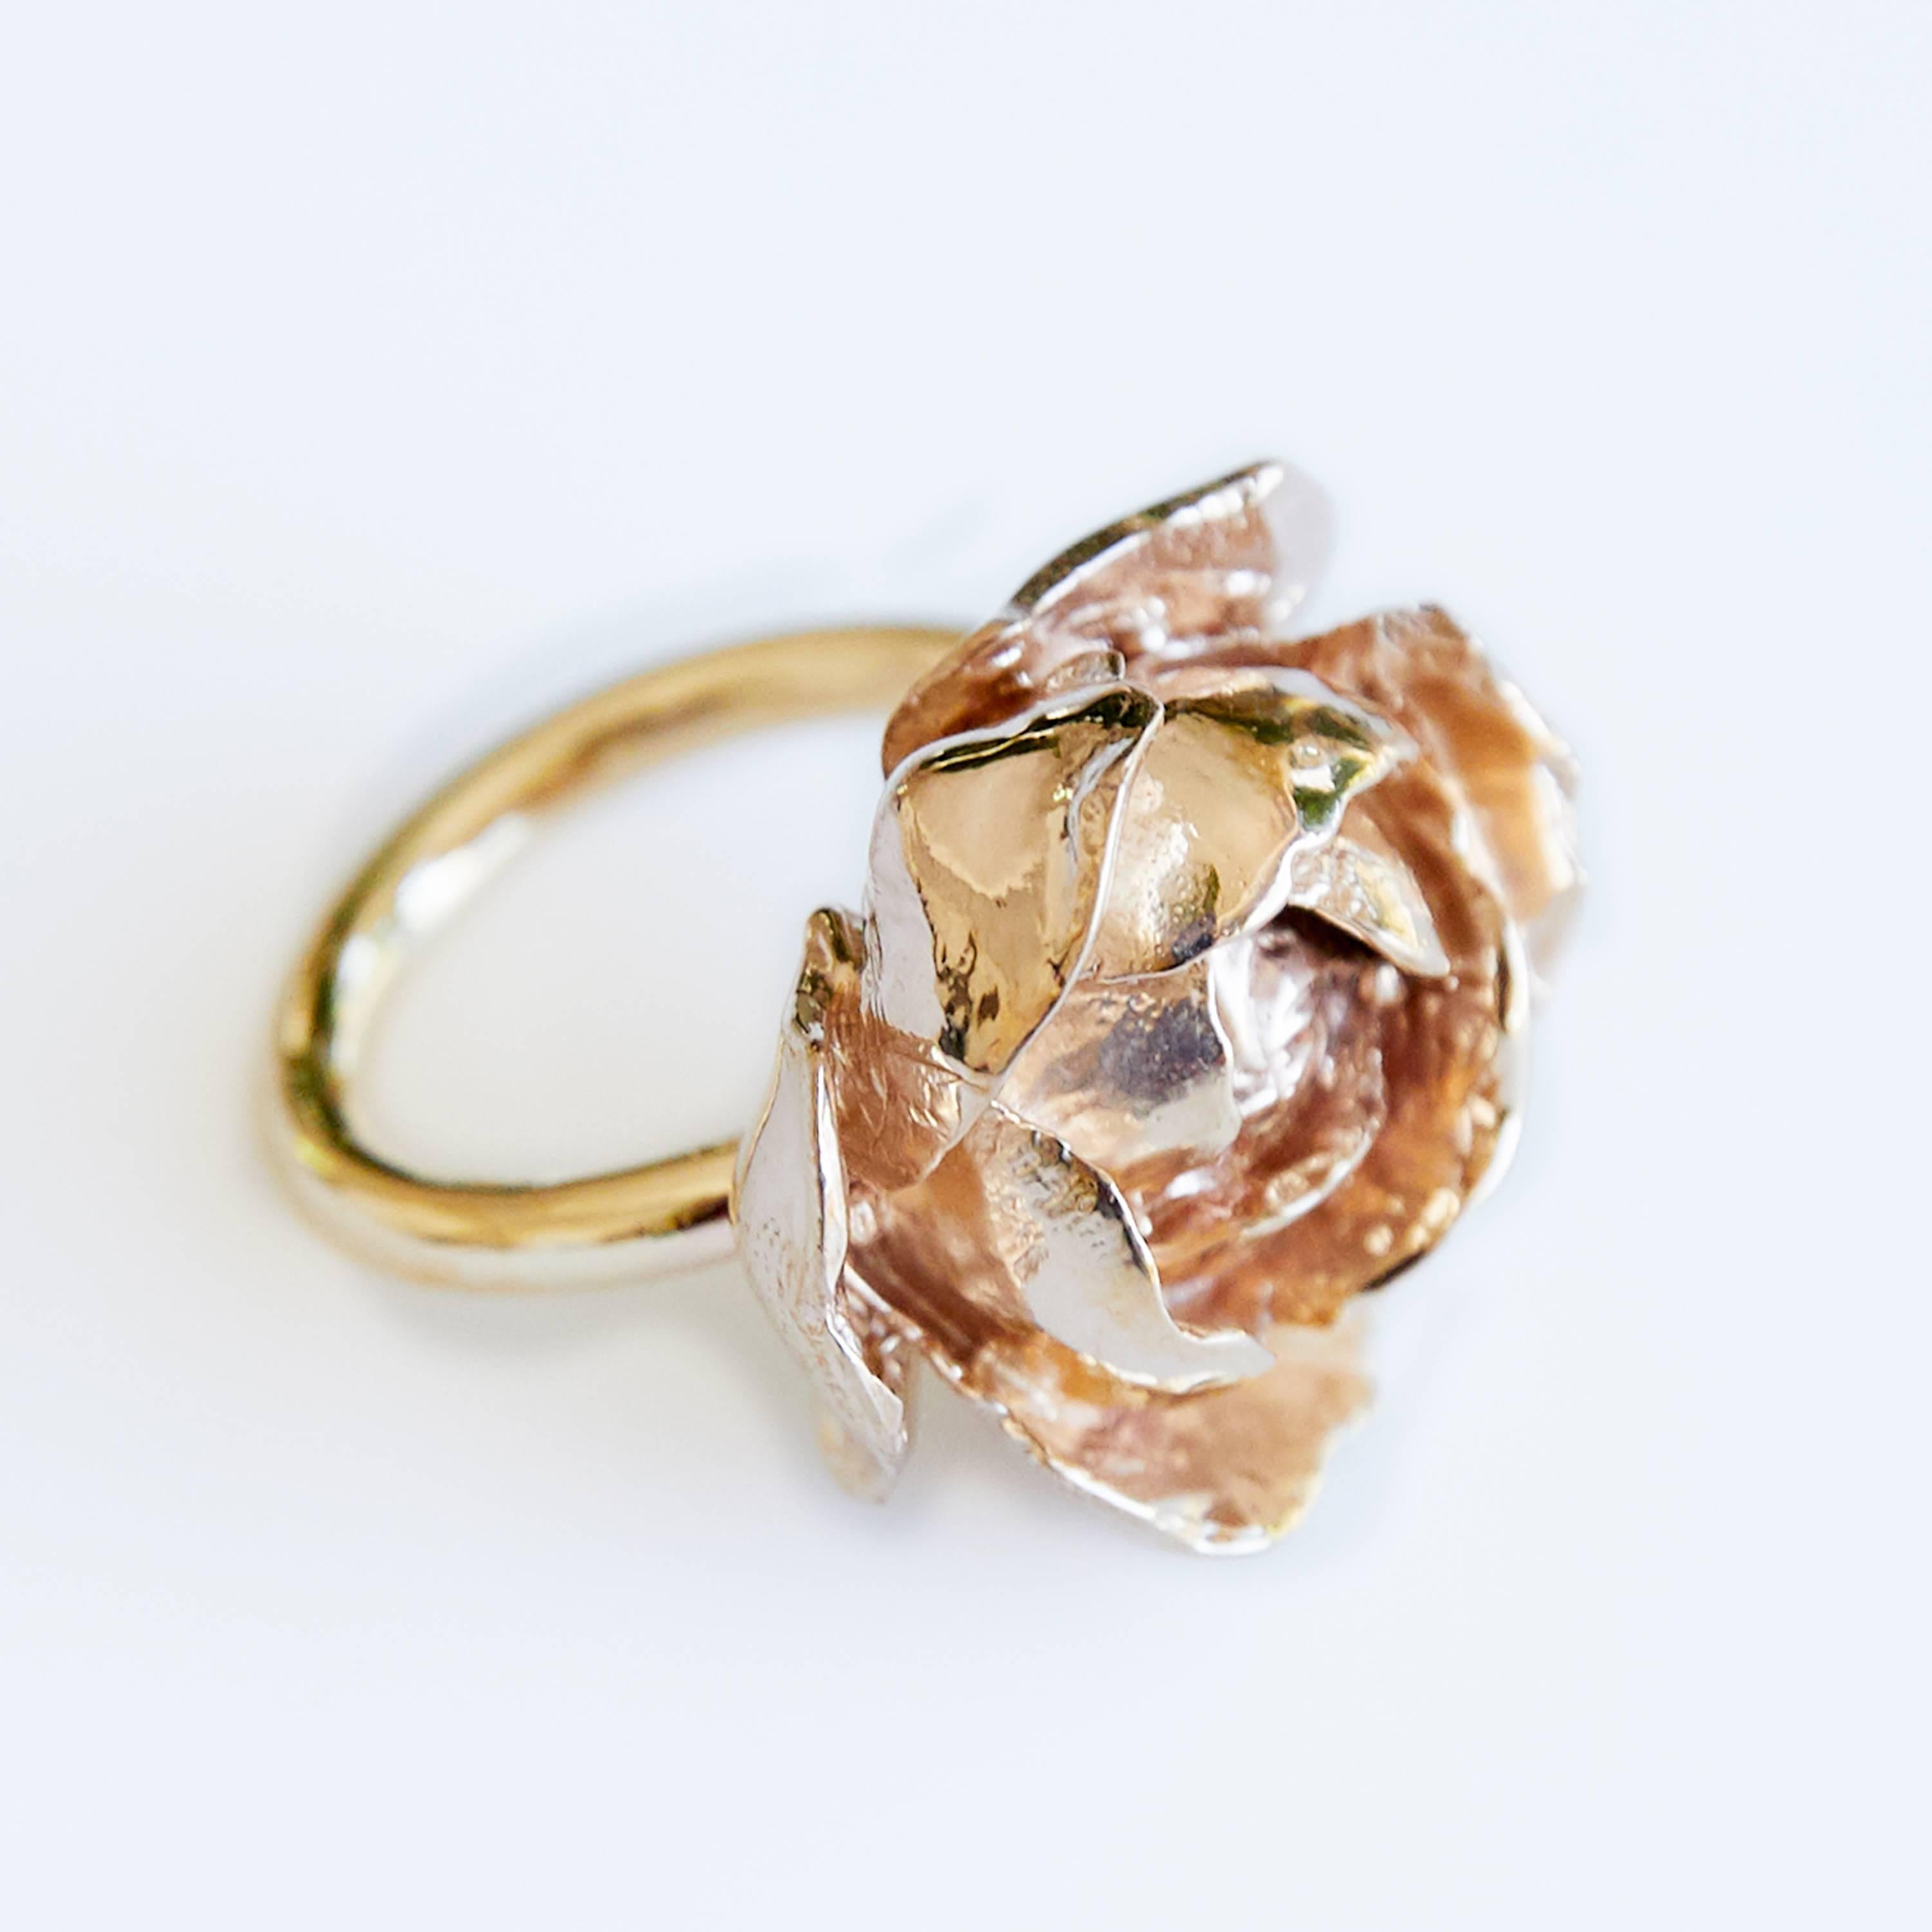 Rose Ring Cocktail Ring Gold Plated
J DAUPHIN 